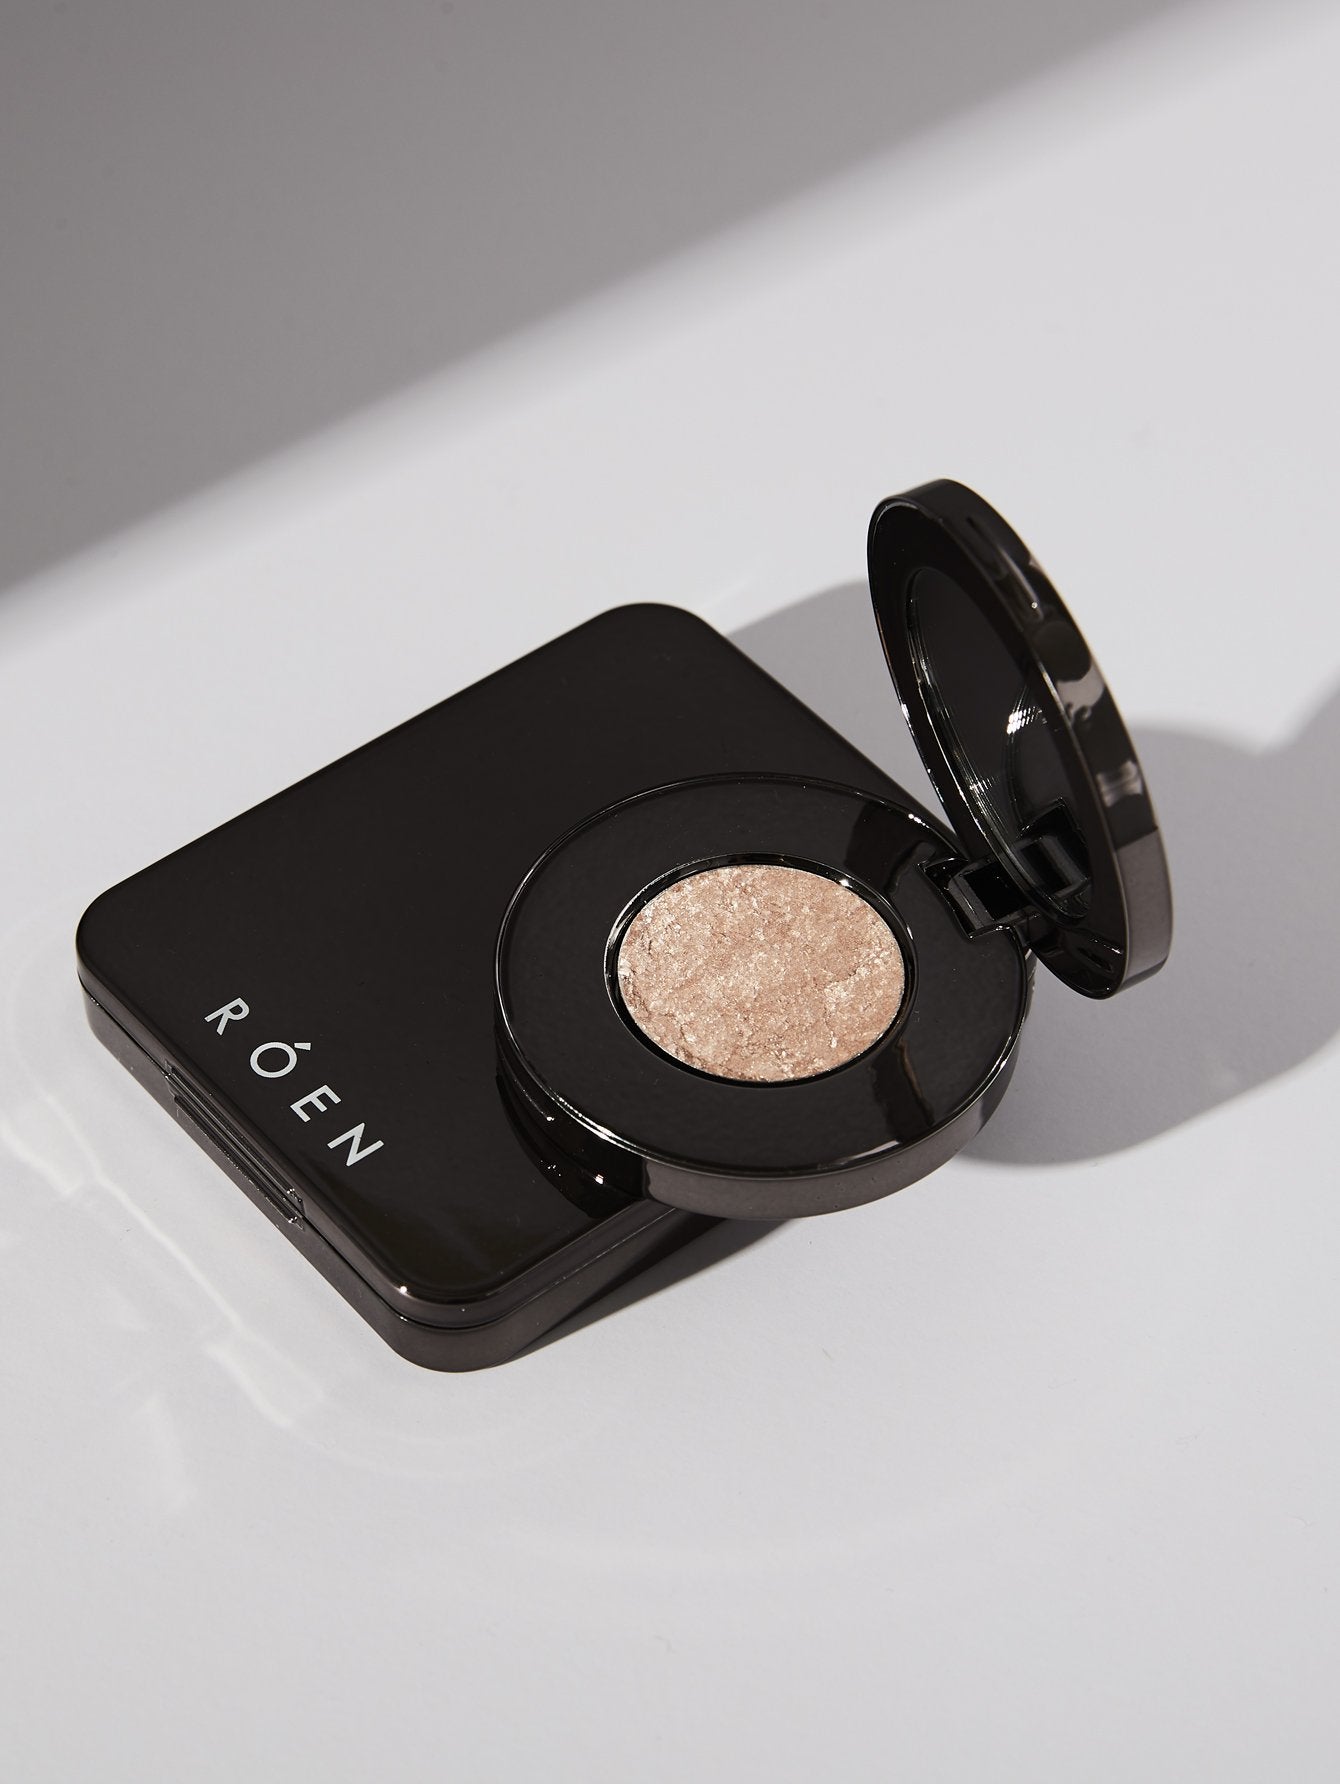 ROEN BEAUTY Makeup - Try our Disco Eye Shadow, this universal shade was made to offer the most unique and insane sparkle.